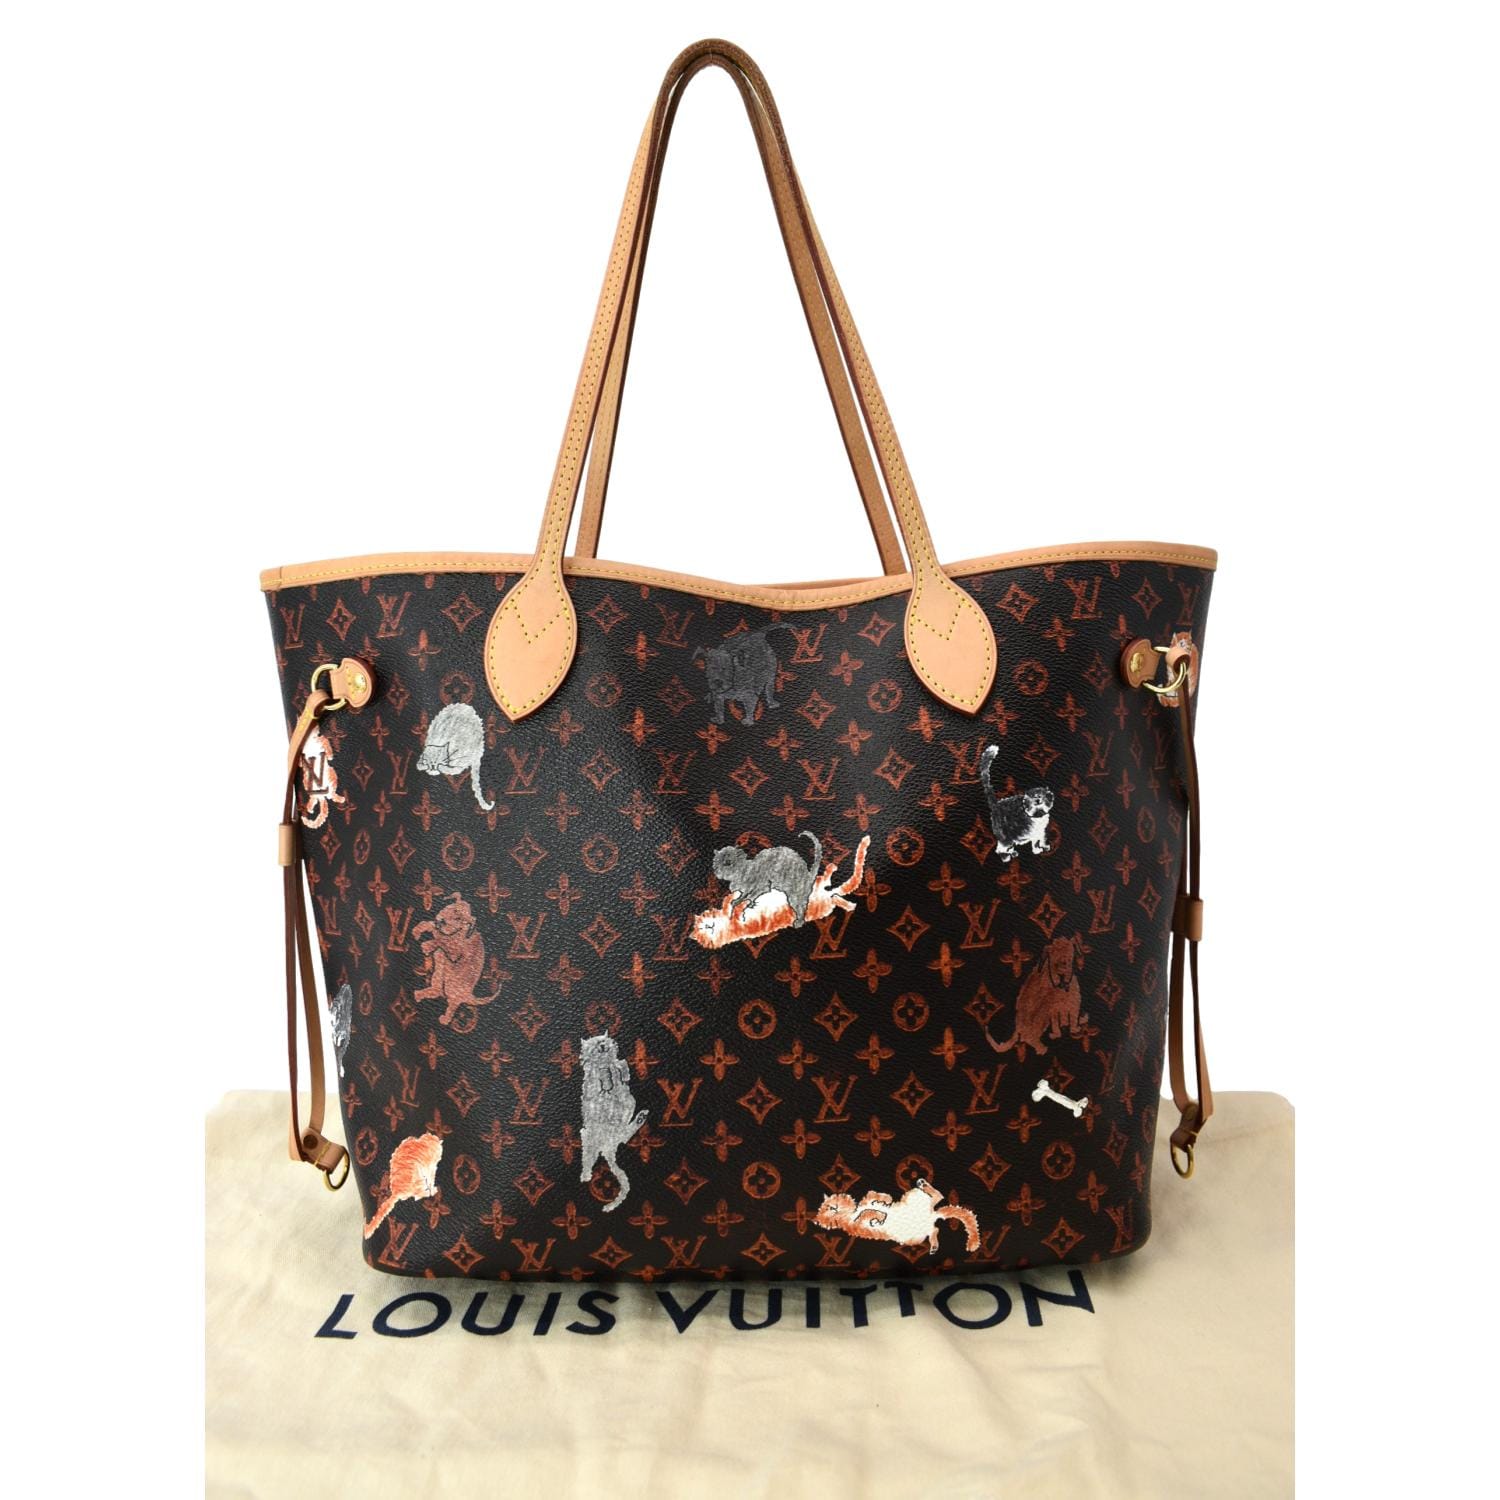 Sold at Auction: Louis Vuitton Catogram Neverfull Pochette